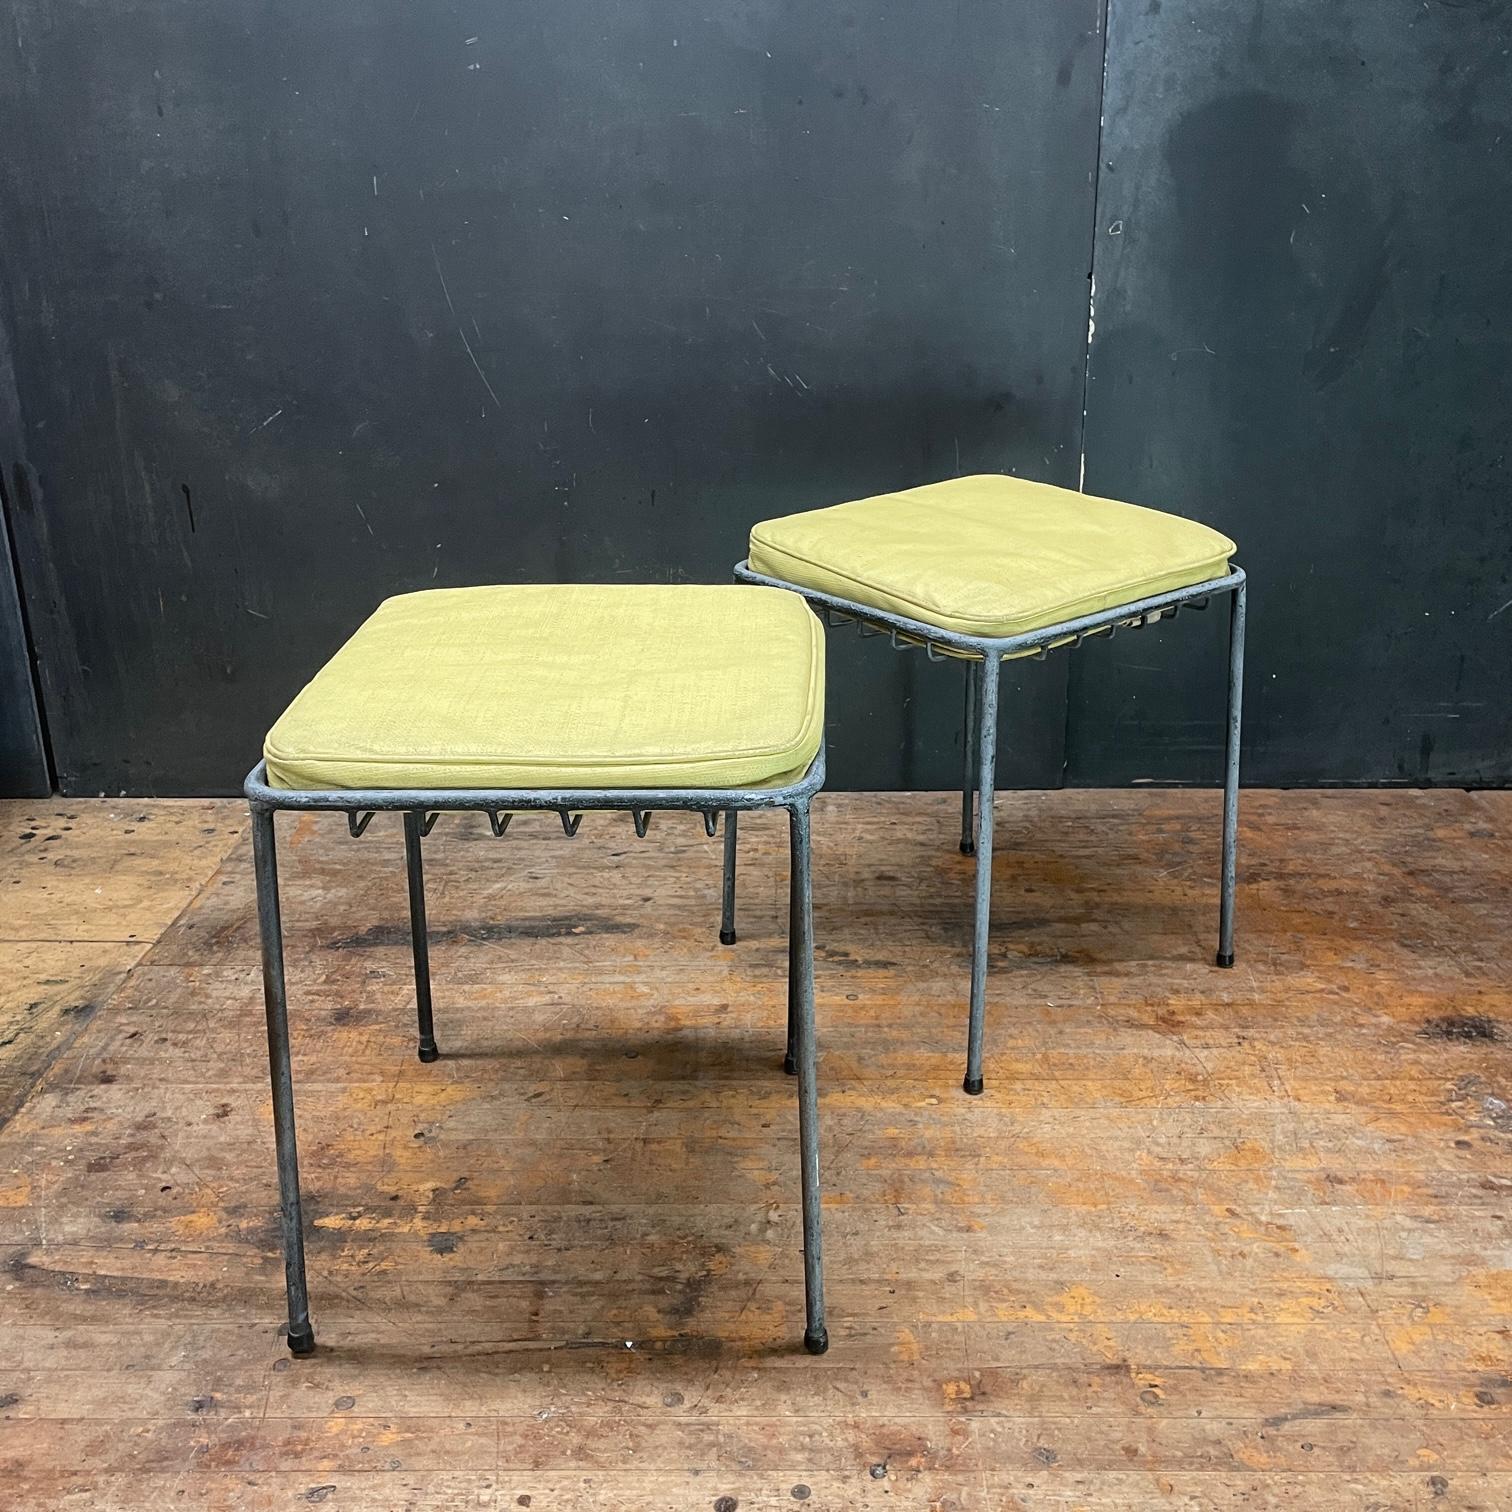 Extremely rare pair of Arbuck Inc. square grid stools, with original labeled cushions. Could source glass tops to make tables, but no glass is included in this sale.  Sold as a pair of stools. 
 these were only produced in 1951.  We, also have a